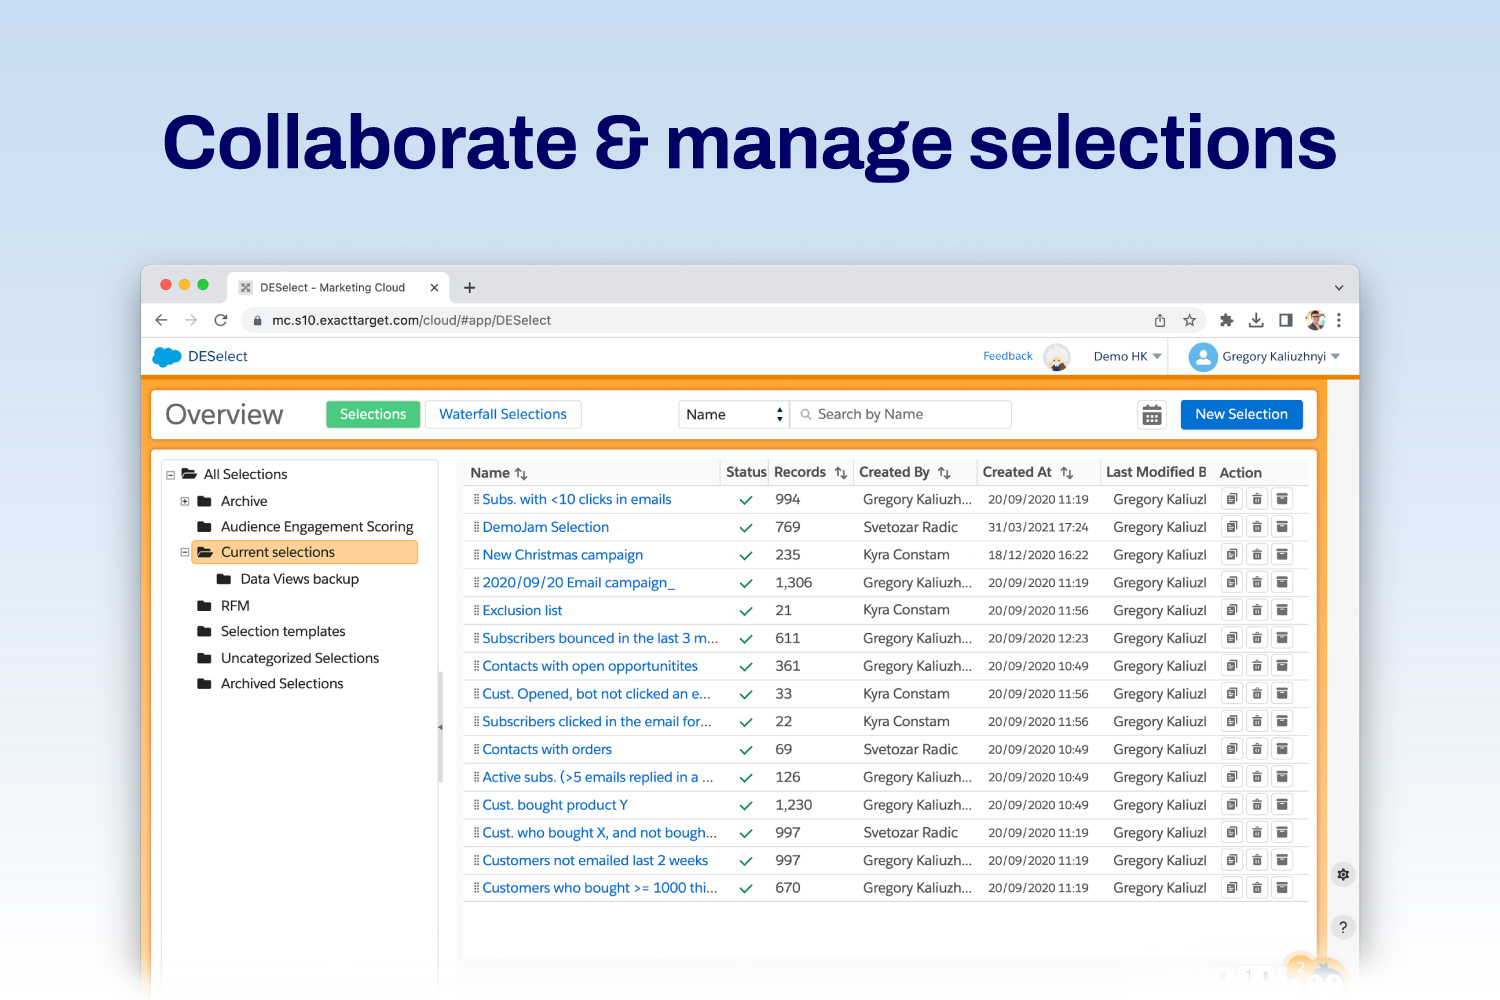 DESelect Segment - Collaborate and manage selections